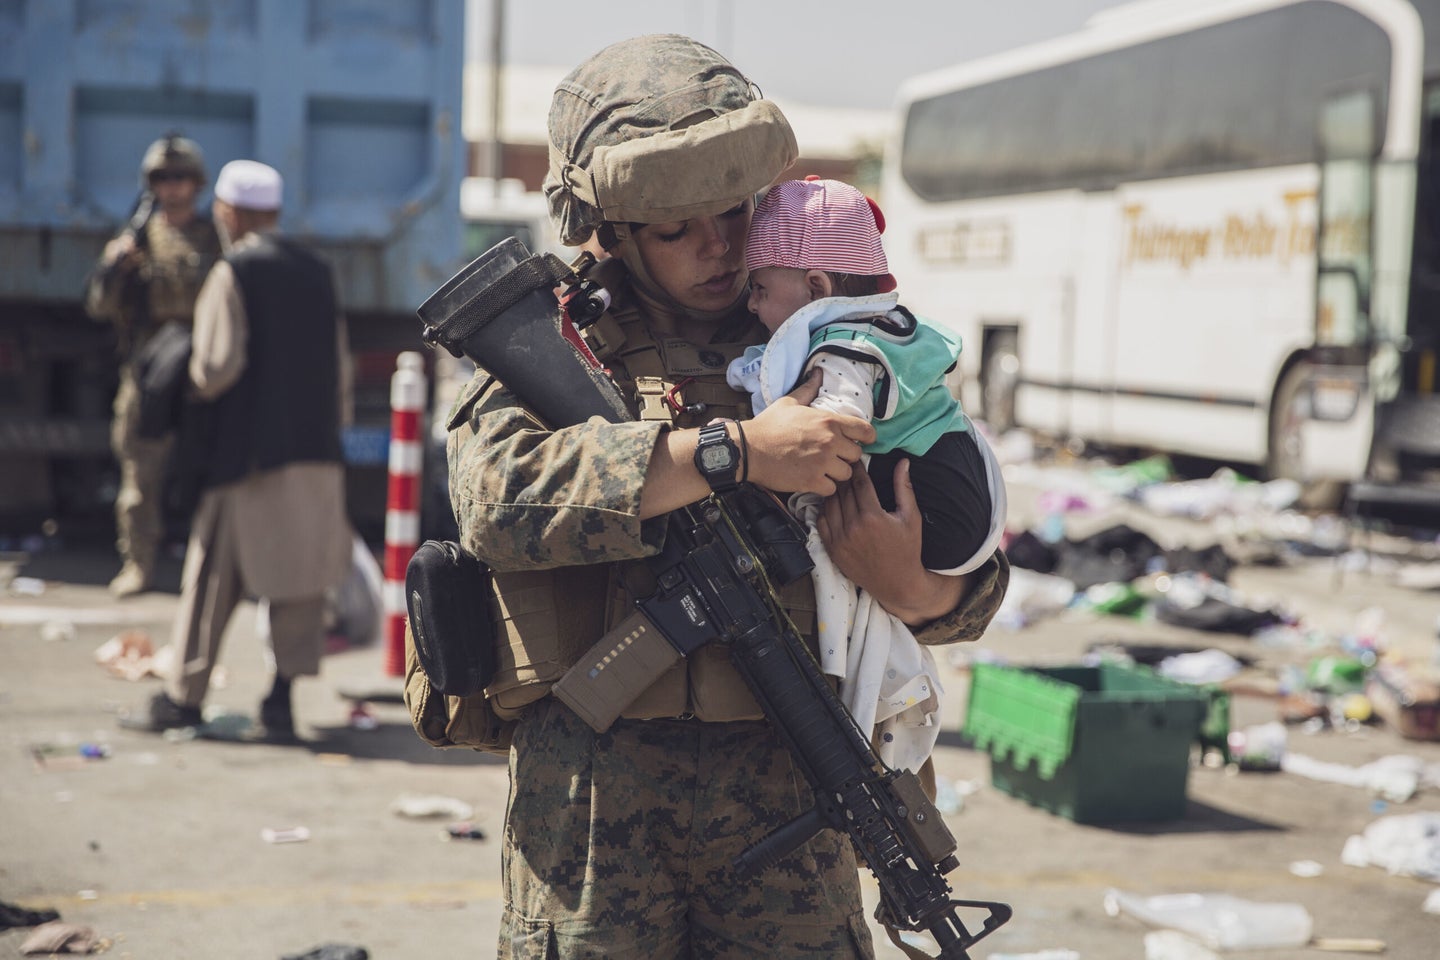 A U.S. Marine with the 24th Marine Expeditionary Unit (MEU) carries a baby as the familiy processes through the Evacuation Control Center (ECC) during an evacuation at Hamid Karzai International Airport, Kabul, Afghanistan, Aug. 28.